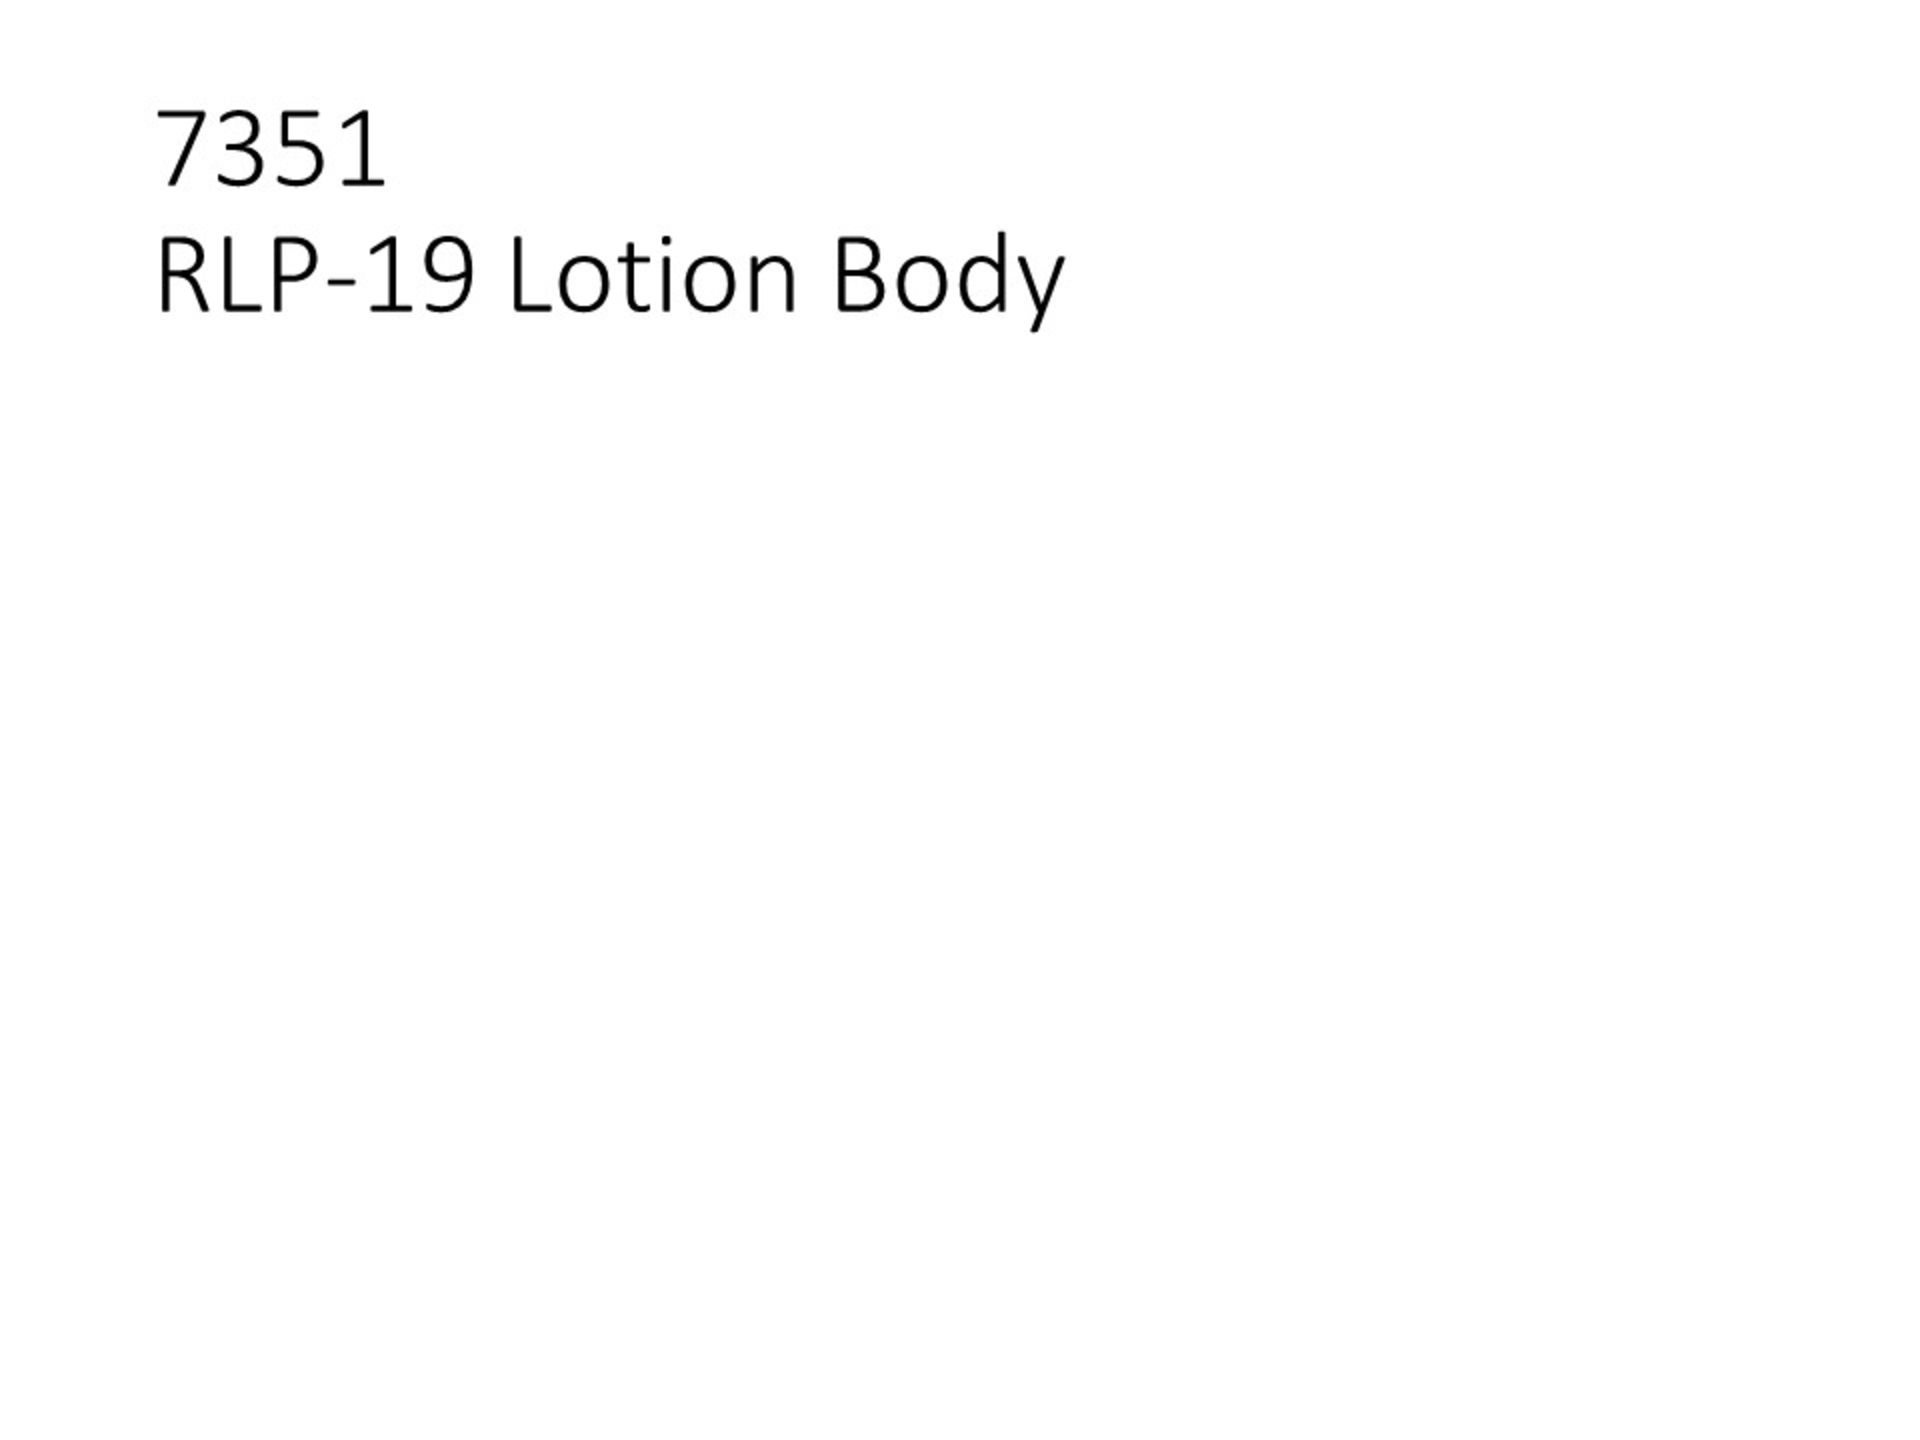 PLASTIC INJECTION MOLD - RLP-19 Lotion Body - Image 7 of 7